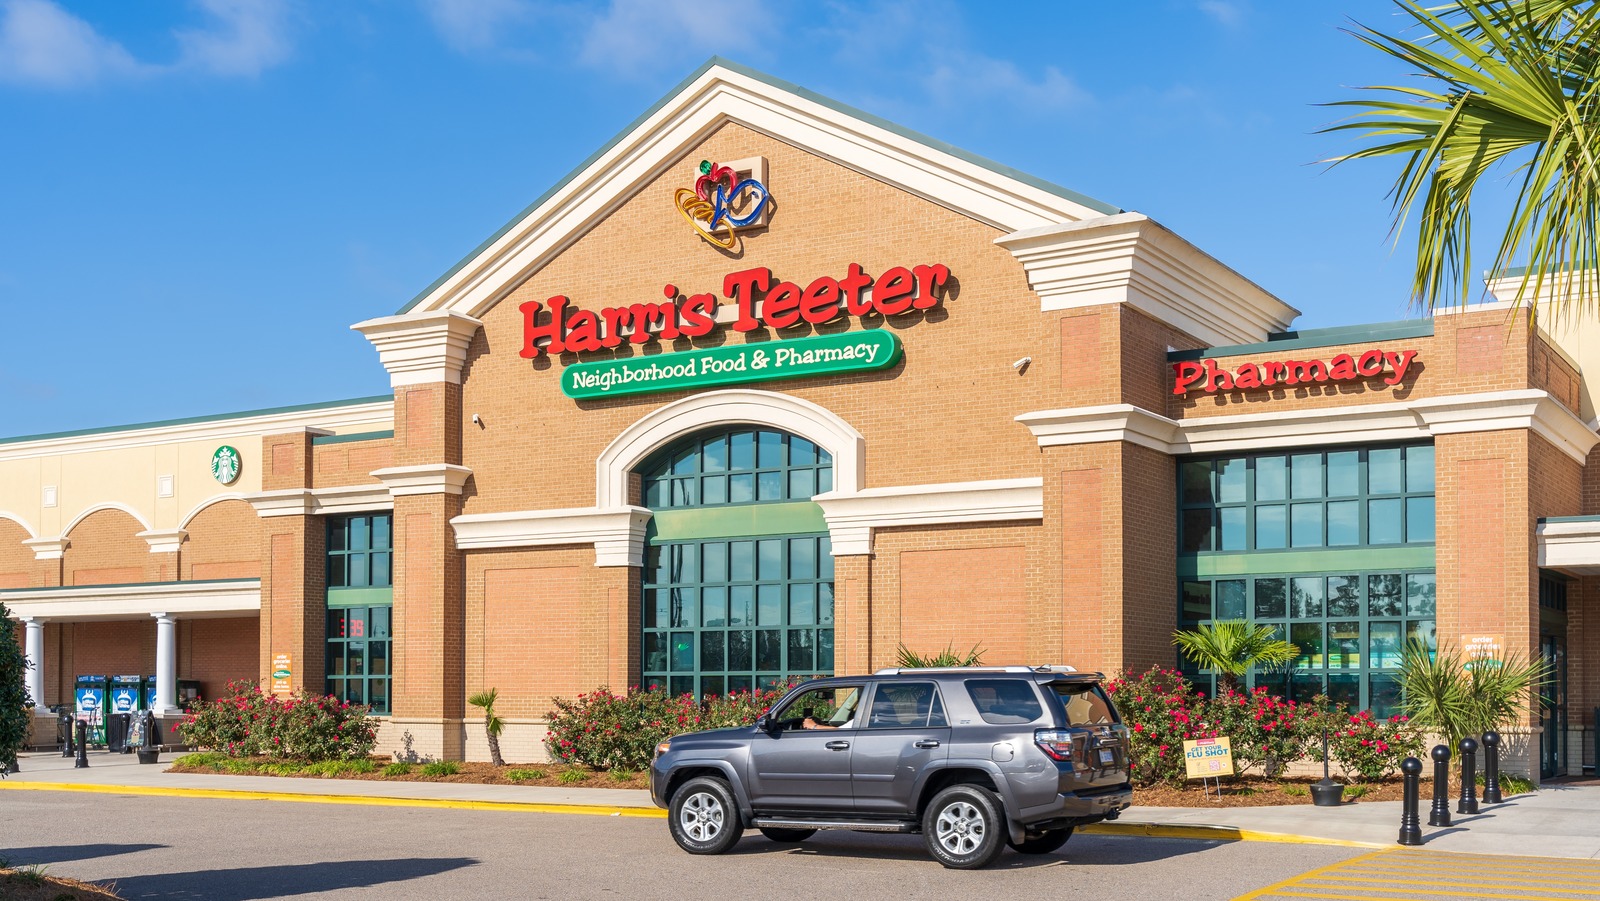 The Ultimate Guide For Shopping At Harris Teeter